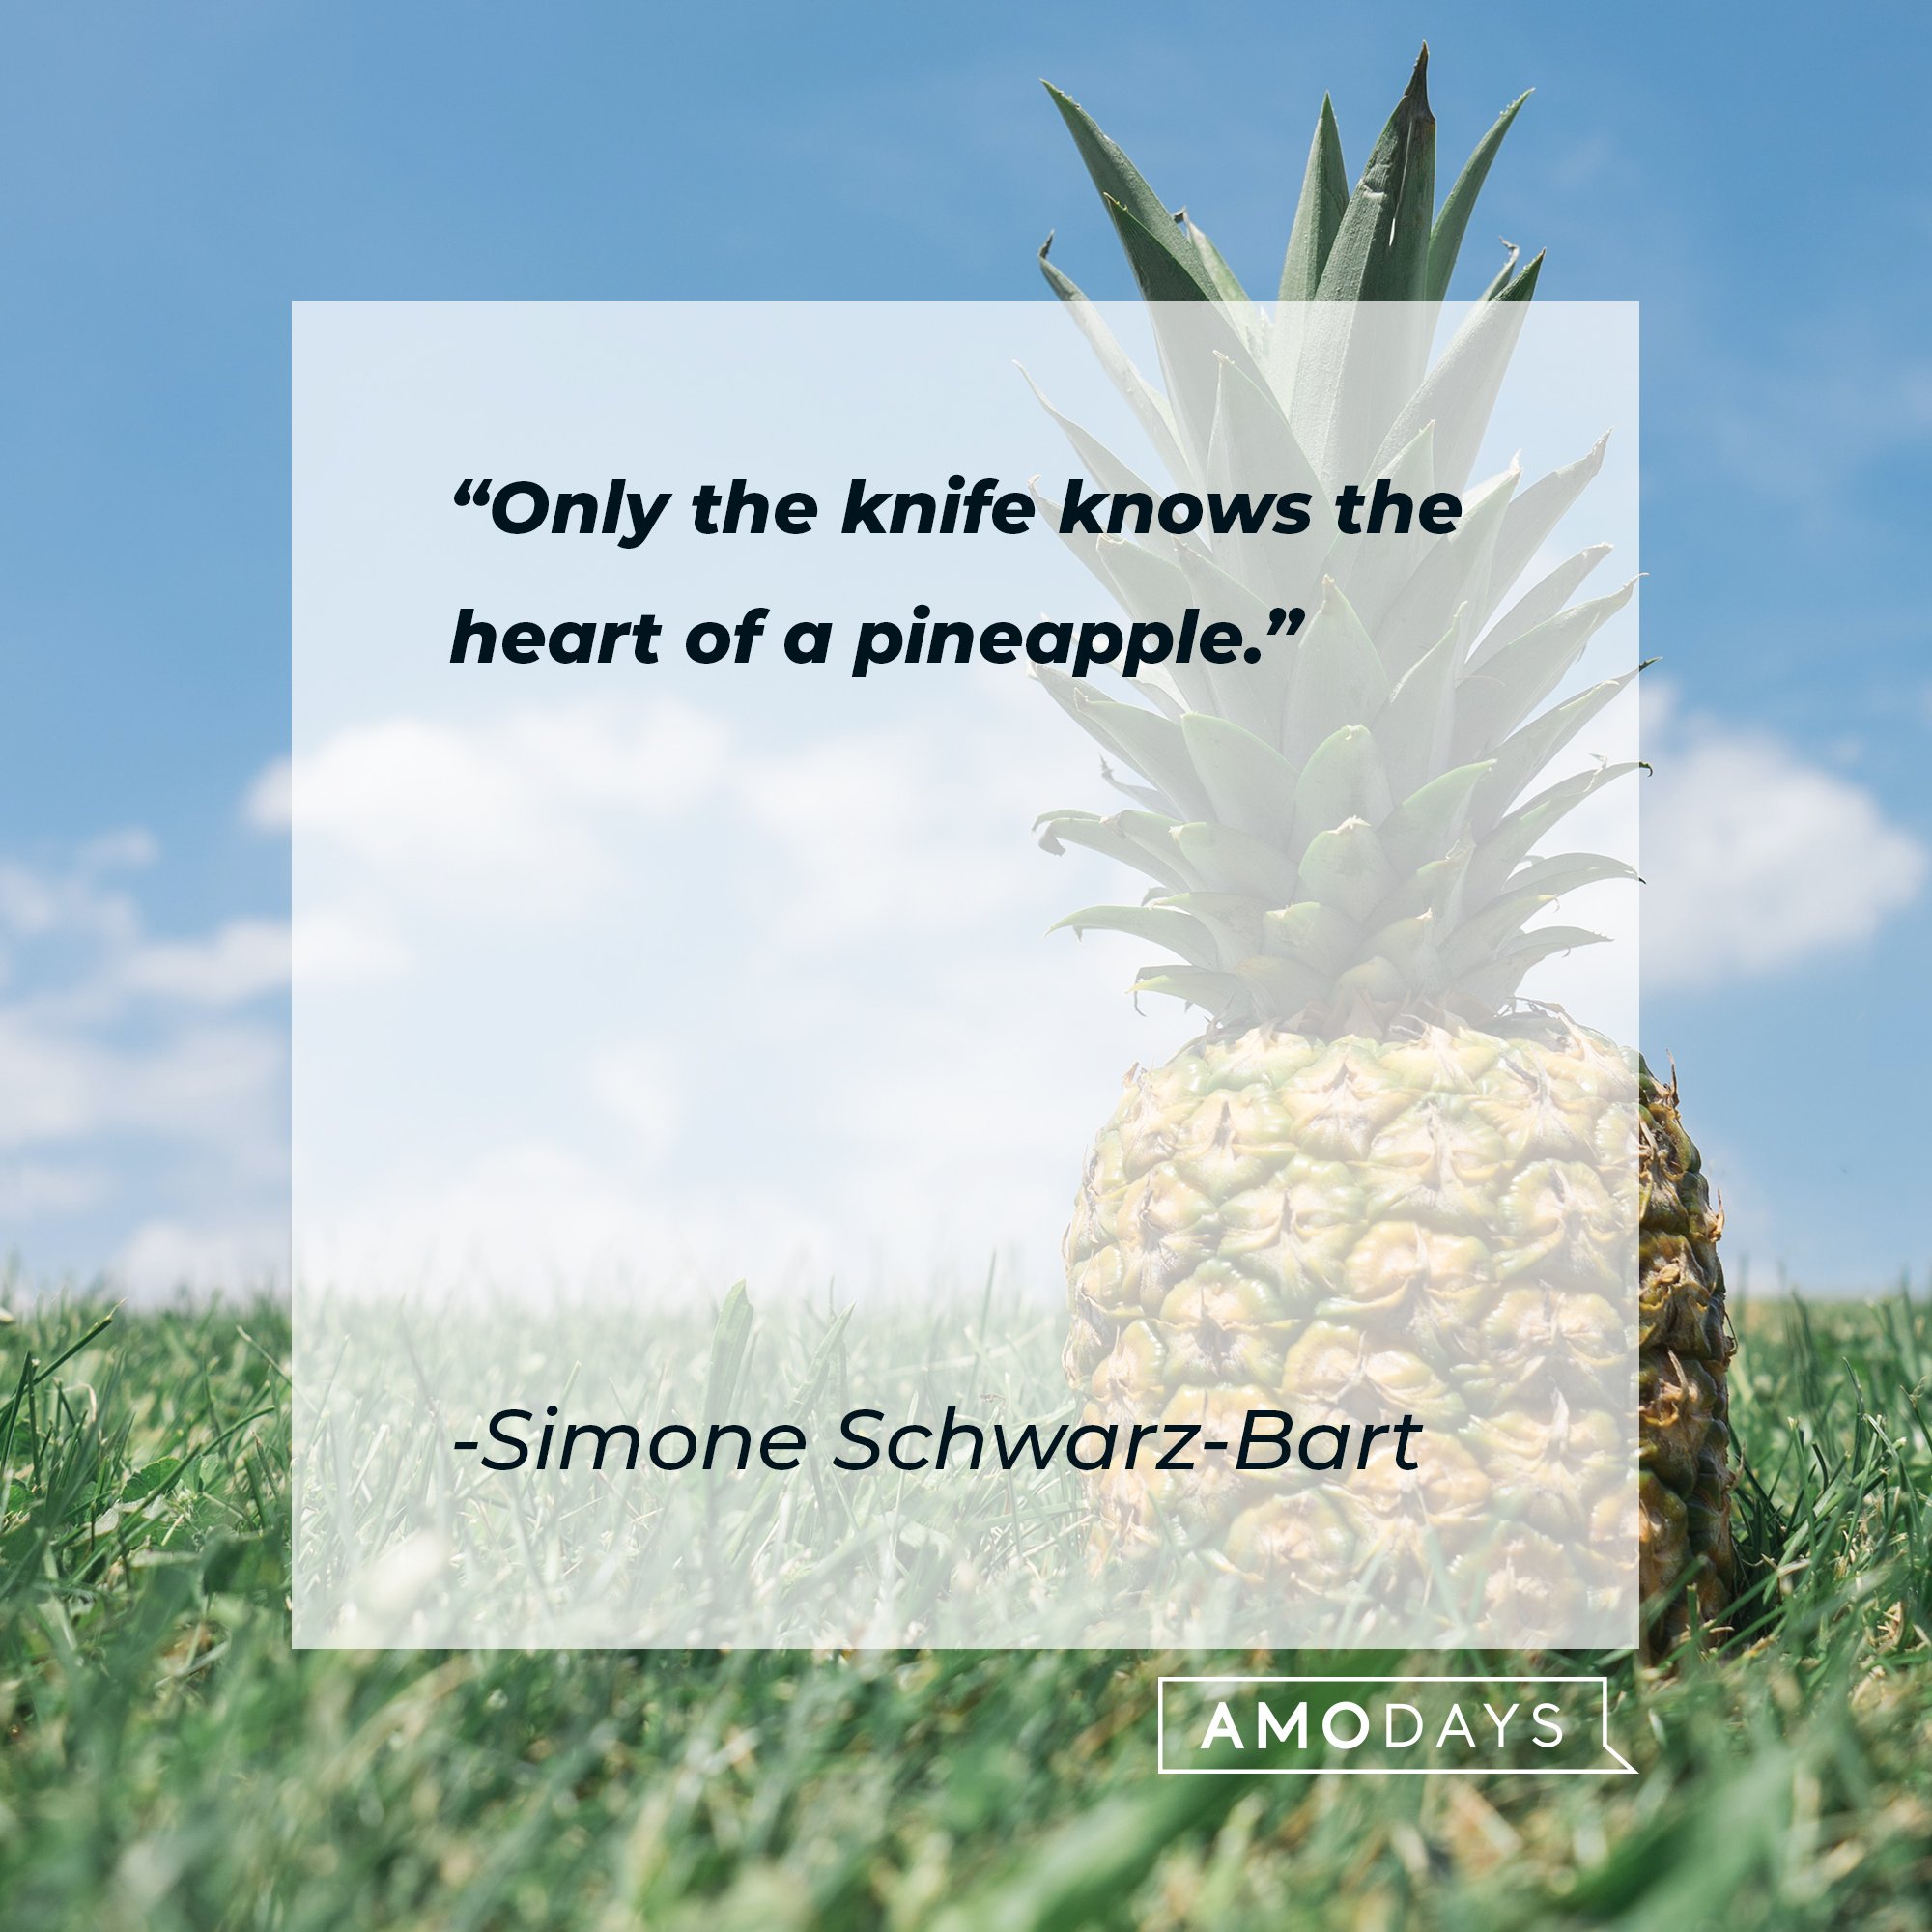 Simone Schwarz-Bart's quote: "Only the knife knows the heart of a pineapple." | Image: AmoDays